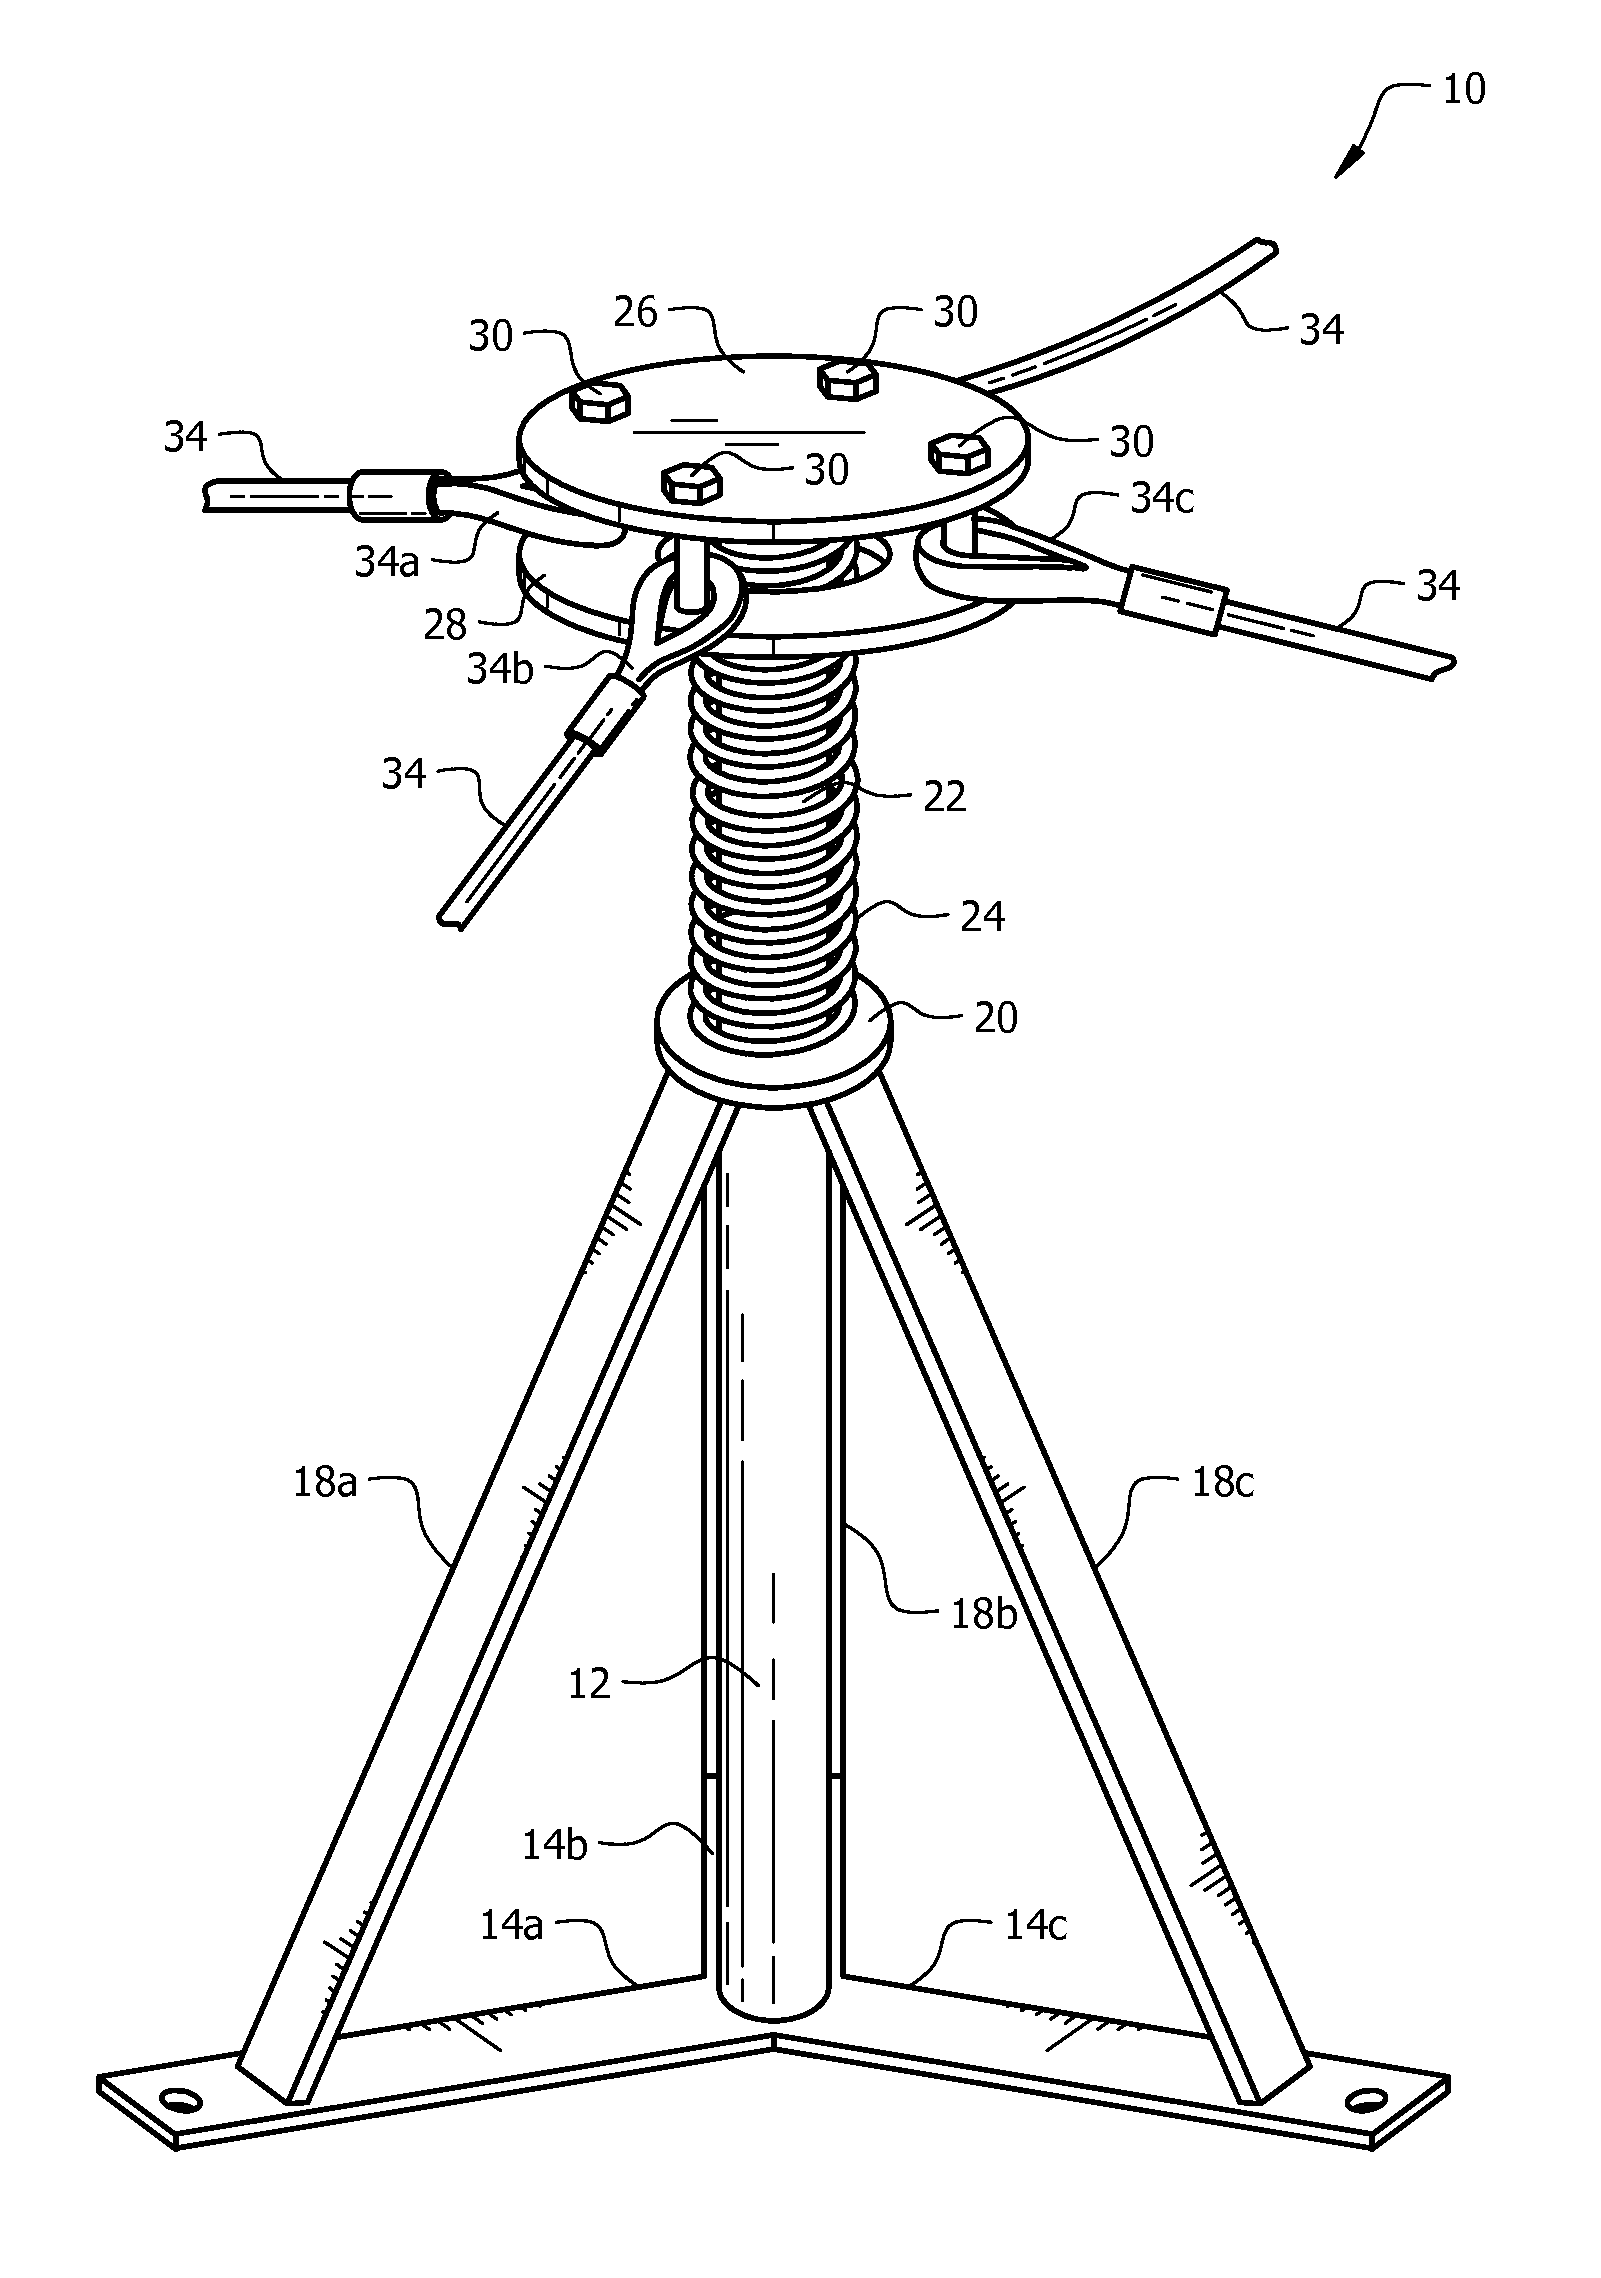 Impact absorbing telescoping post for multi-panel trampolines